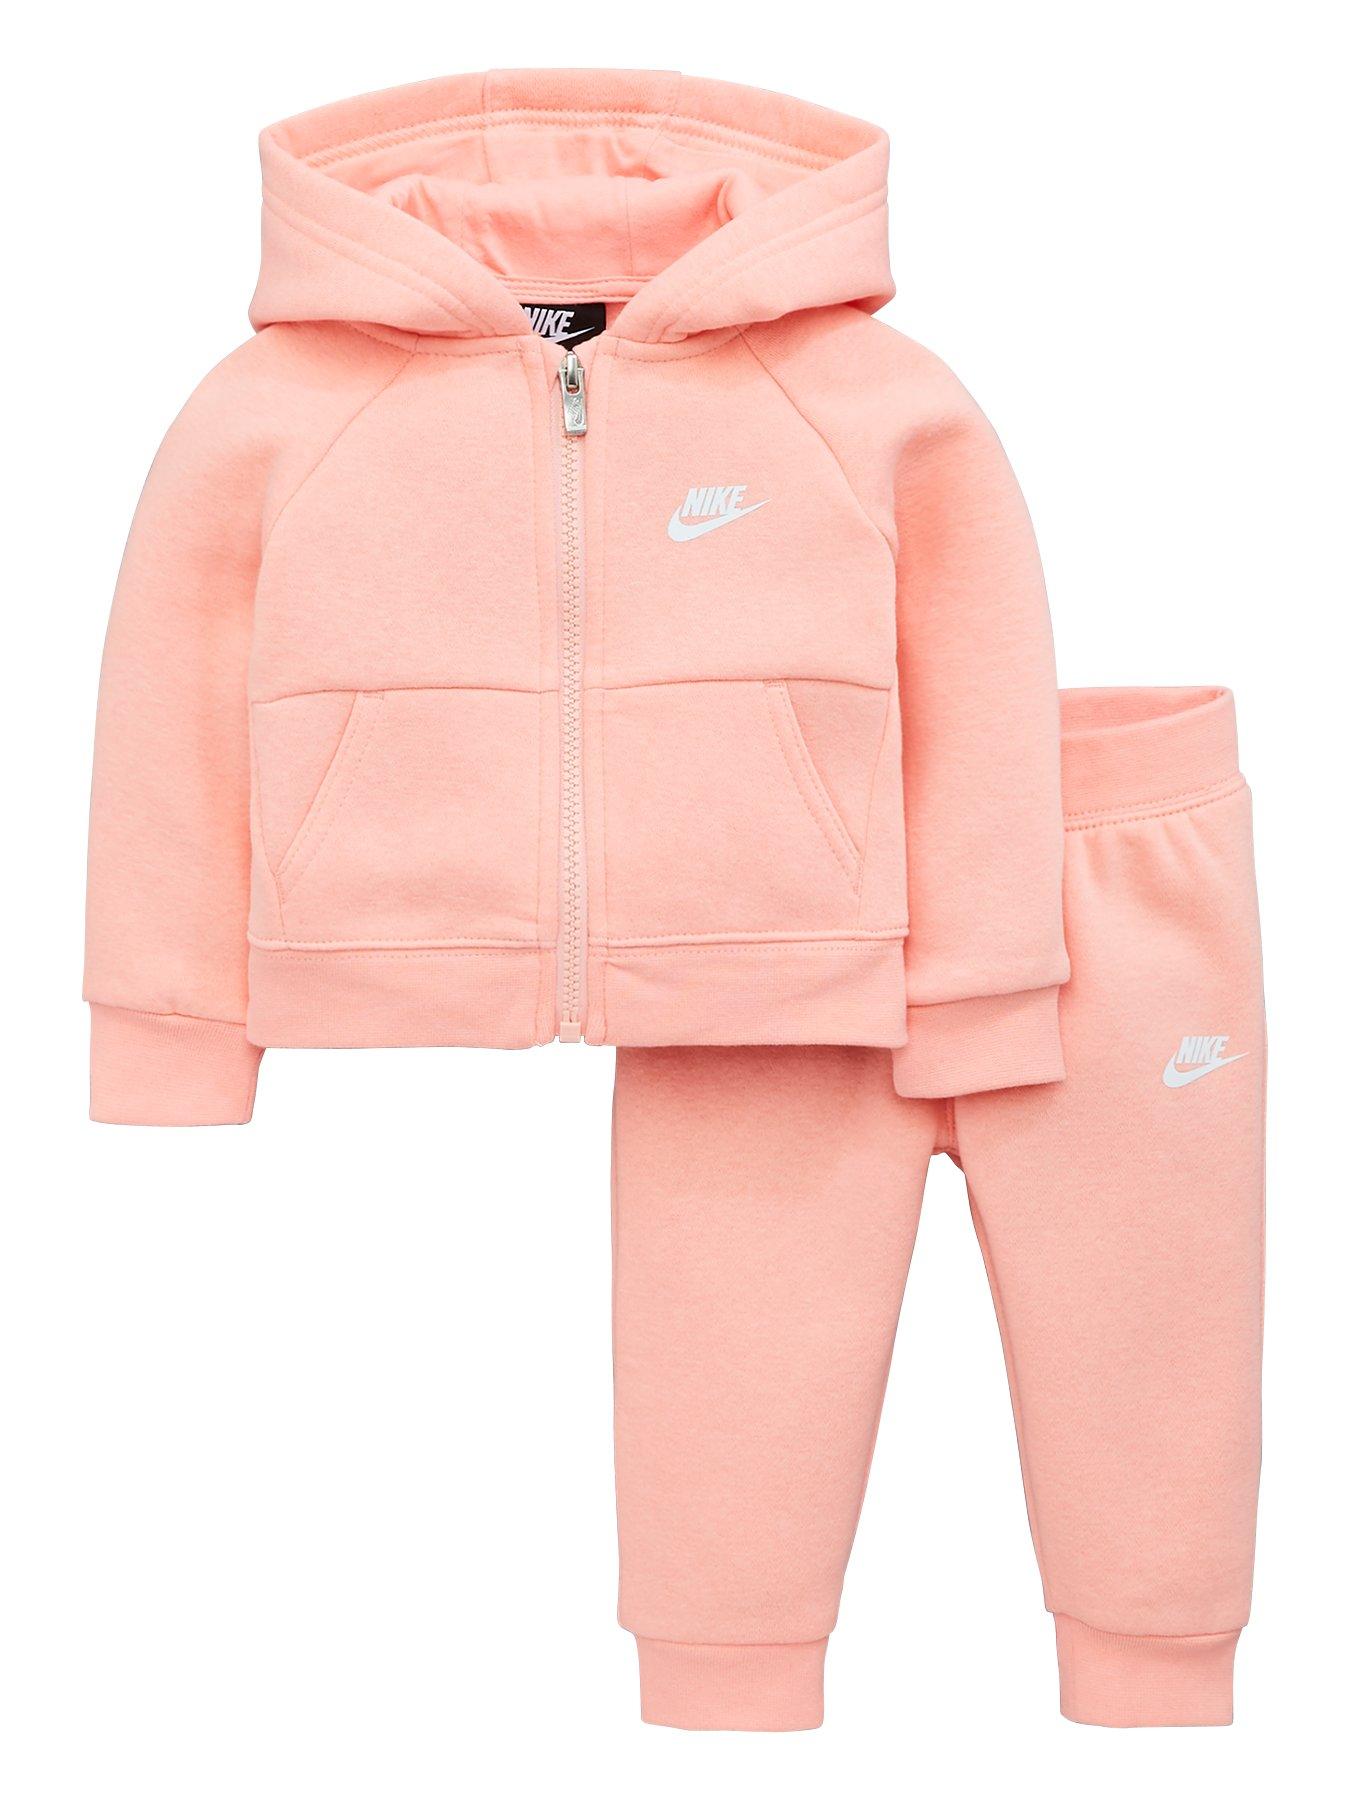 pink nike tracksuit baby